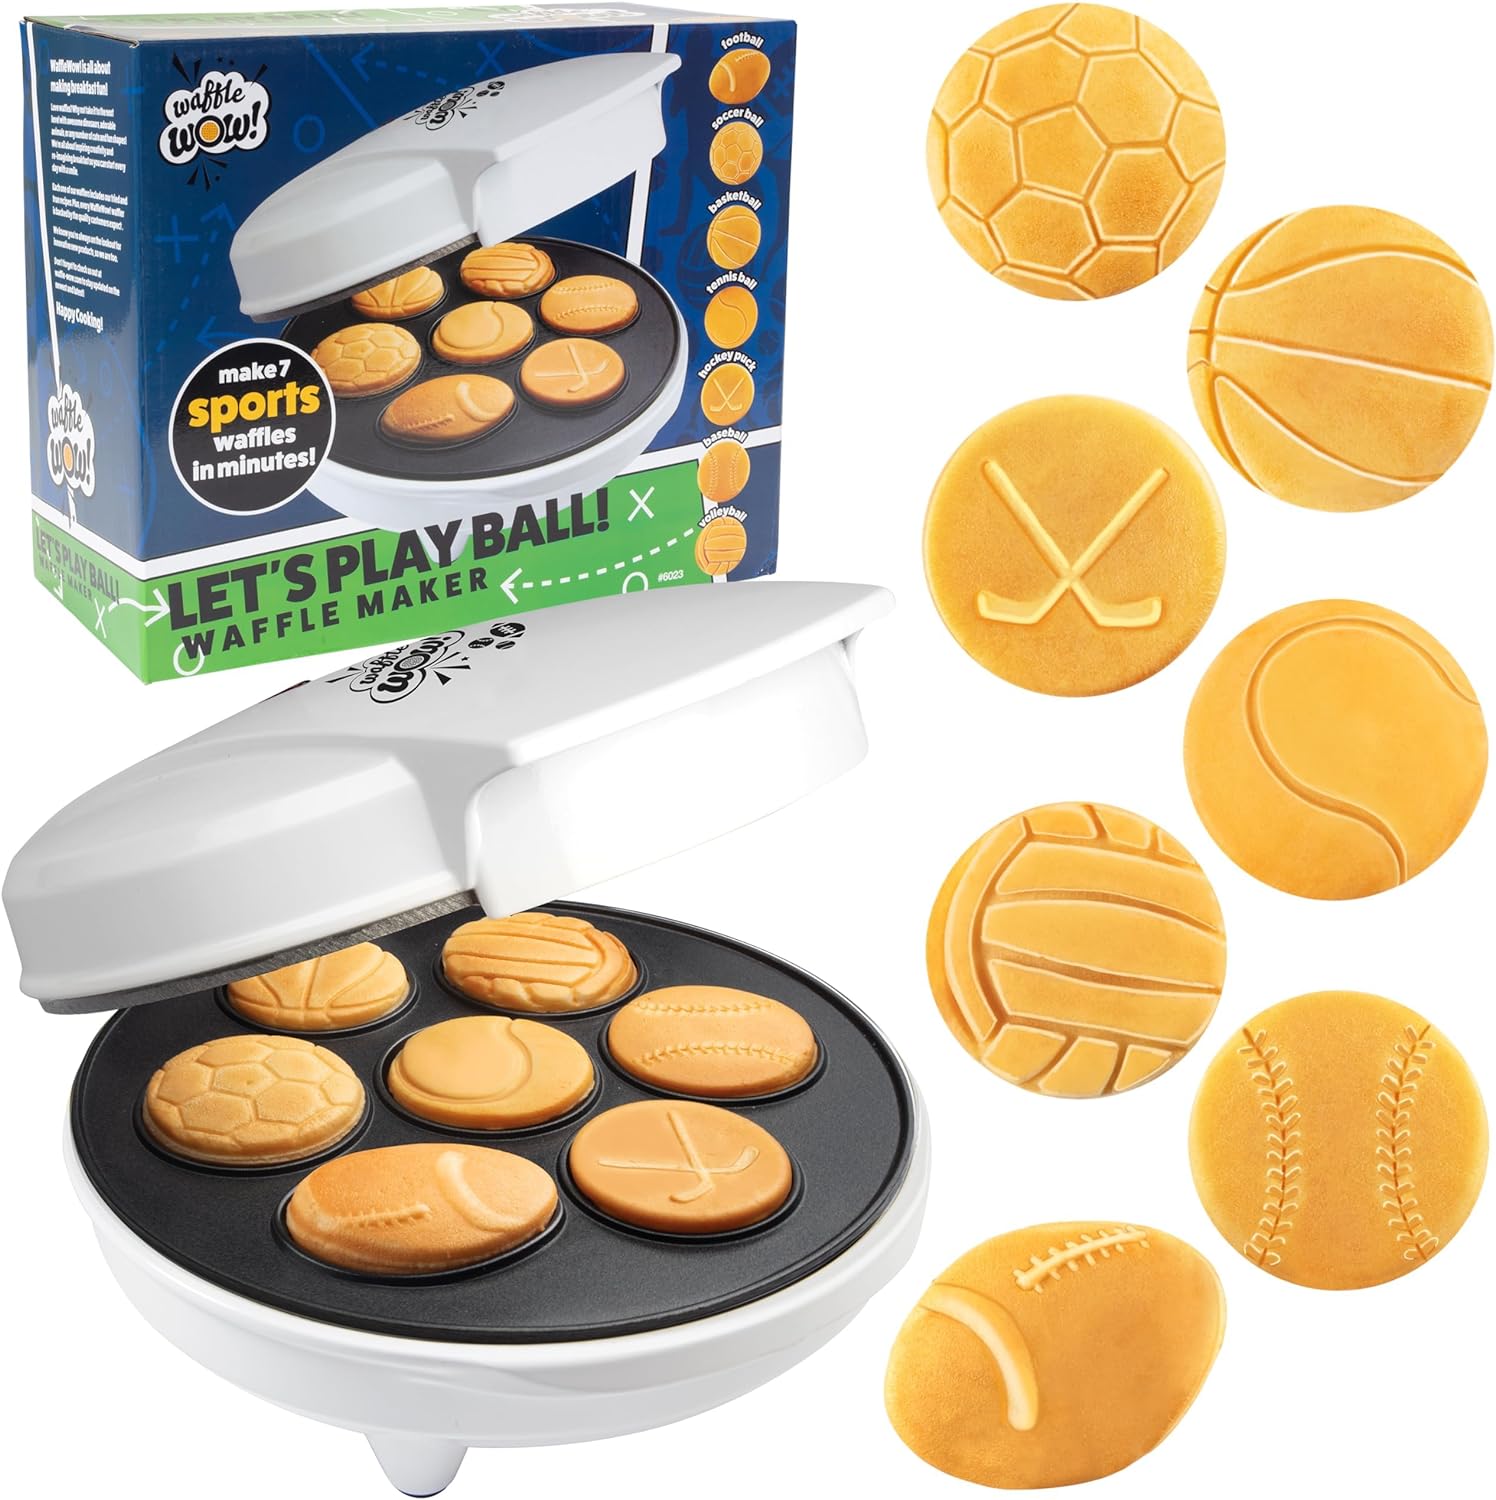 Let's Play Ball Waffle Maker